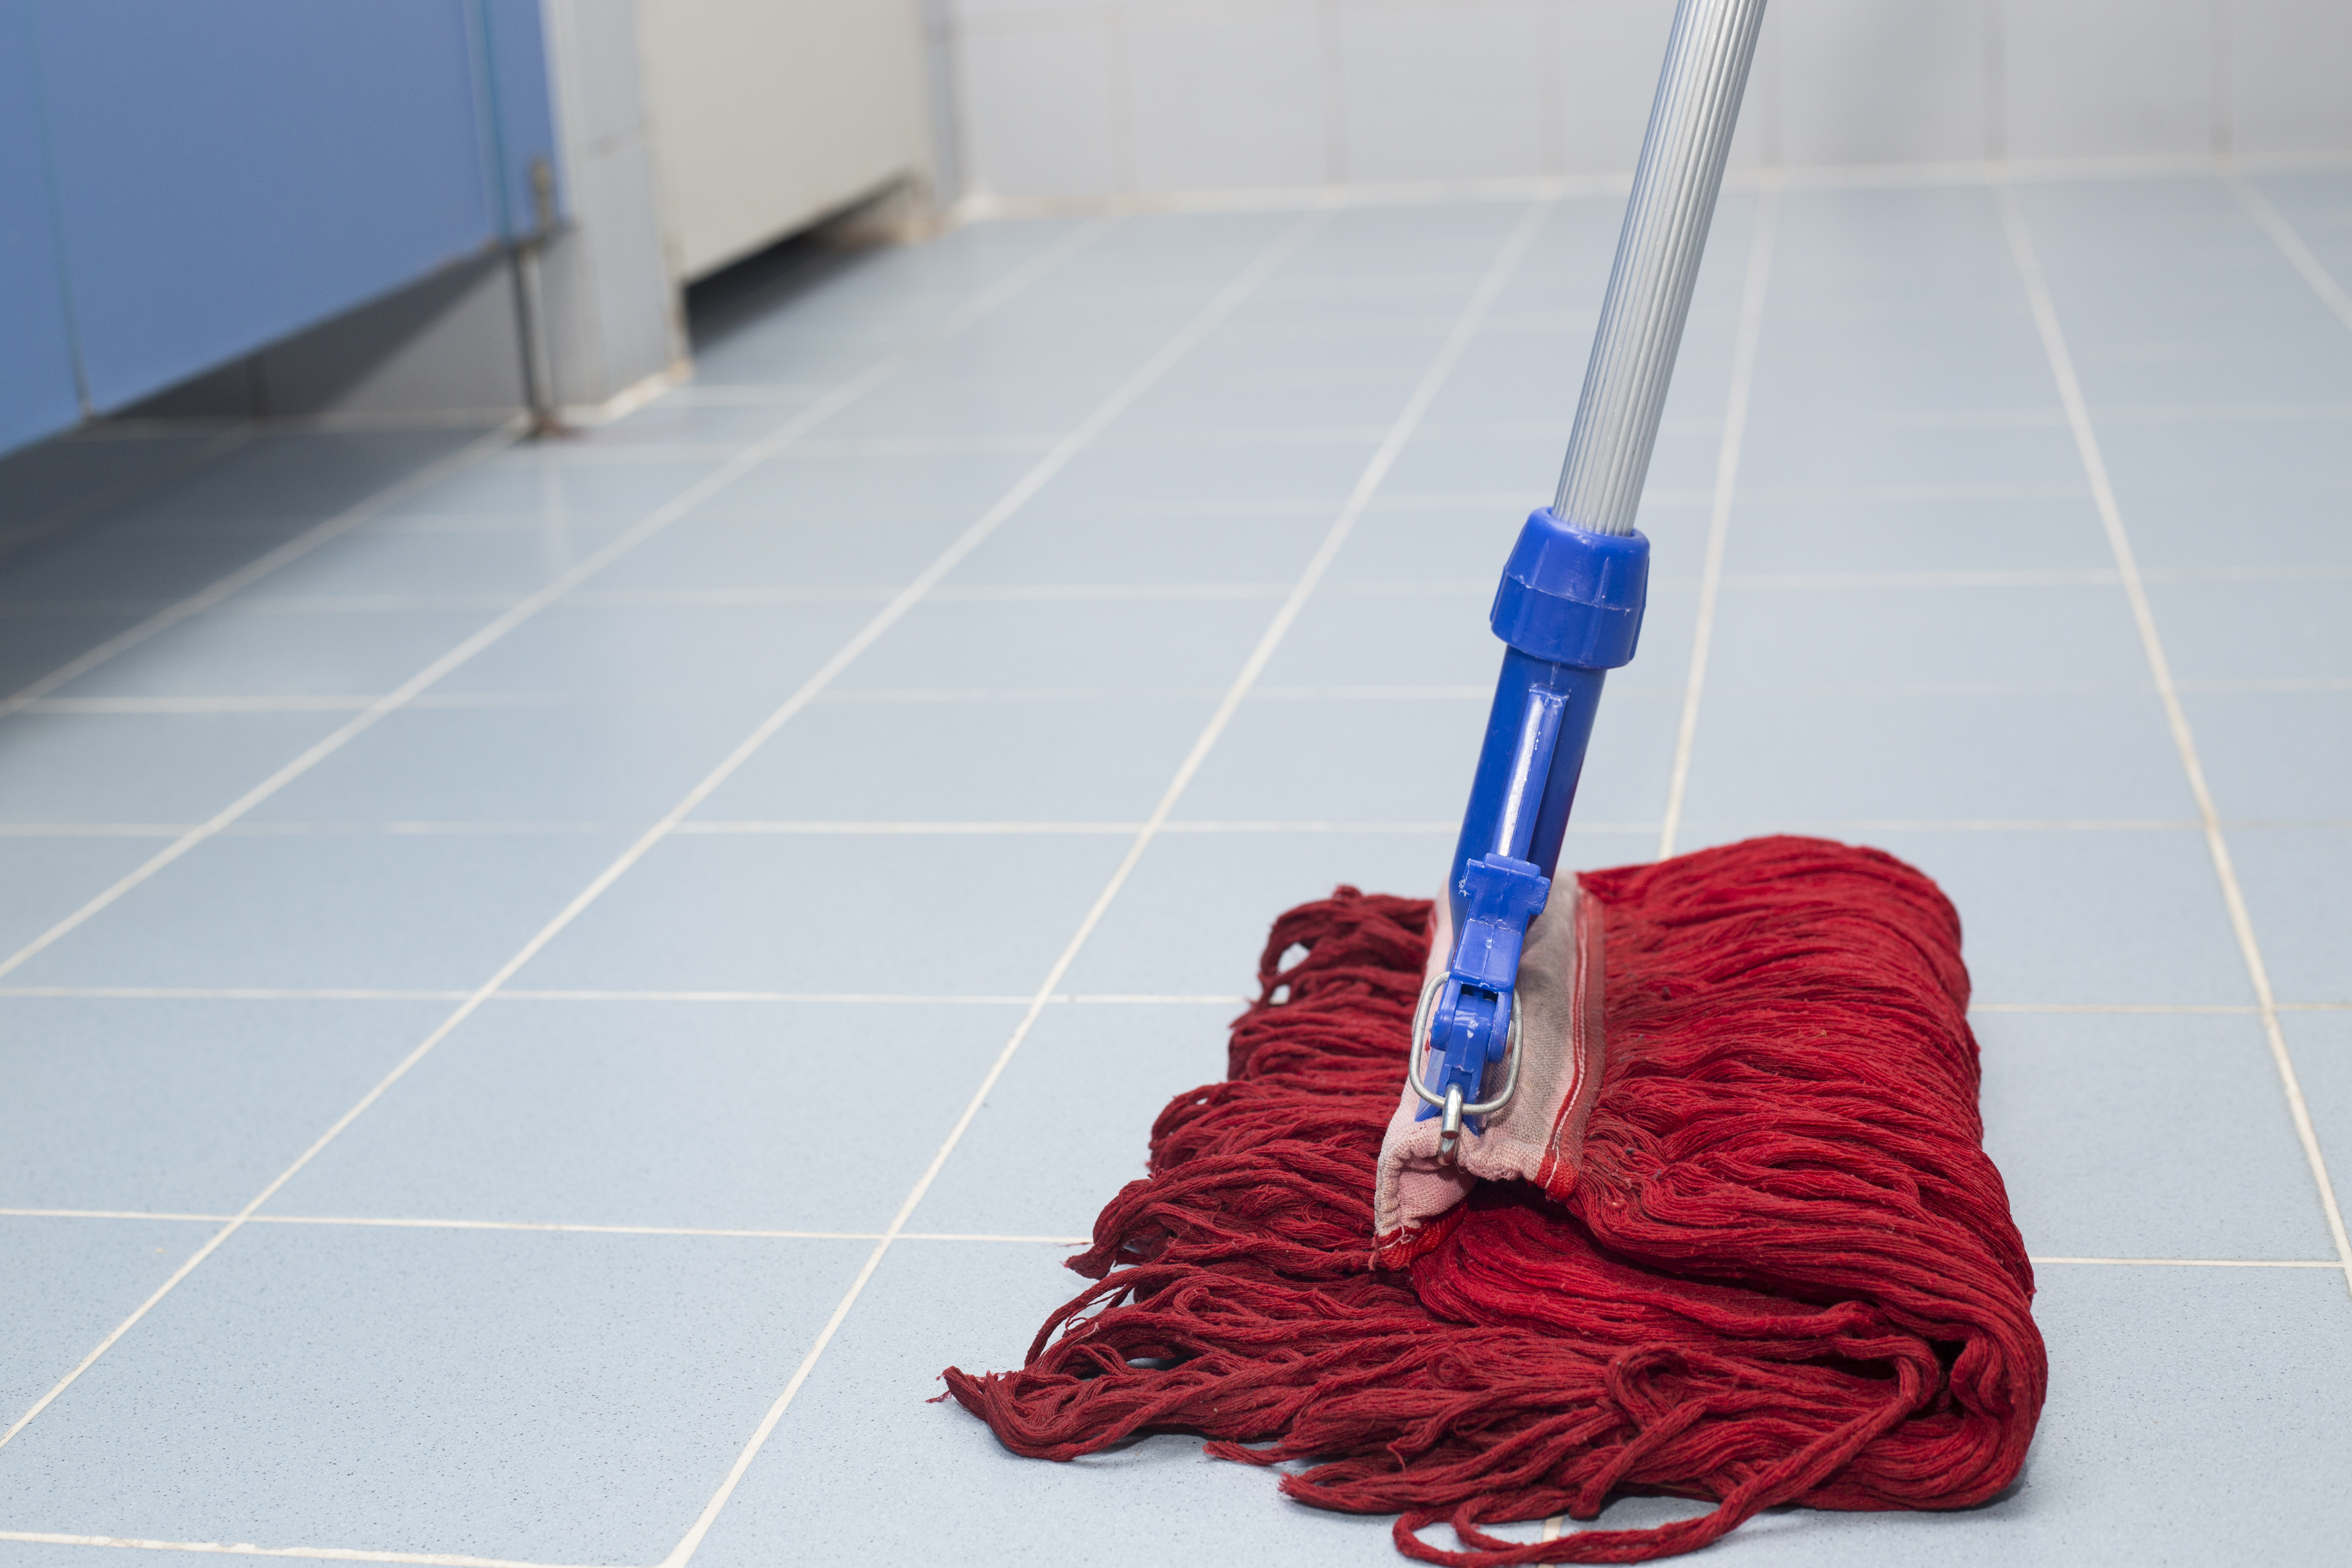 https://www.mr-maid.com/wp-content/uploads/2017/10/Mopping-Dirty-Floor-1.jpg